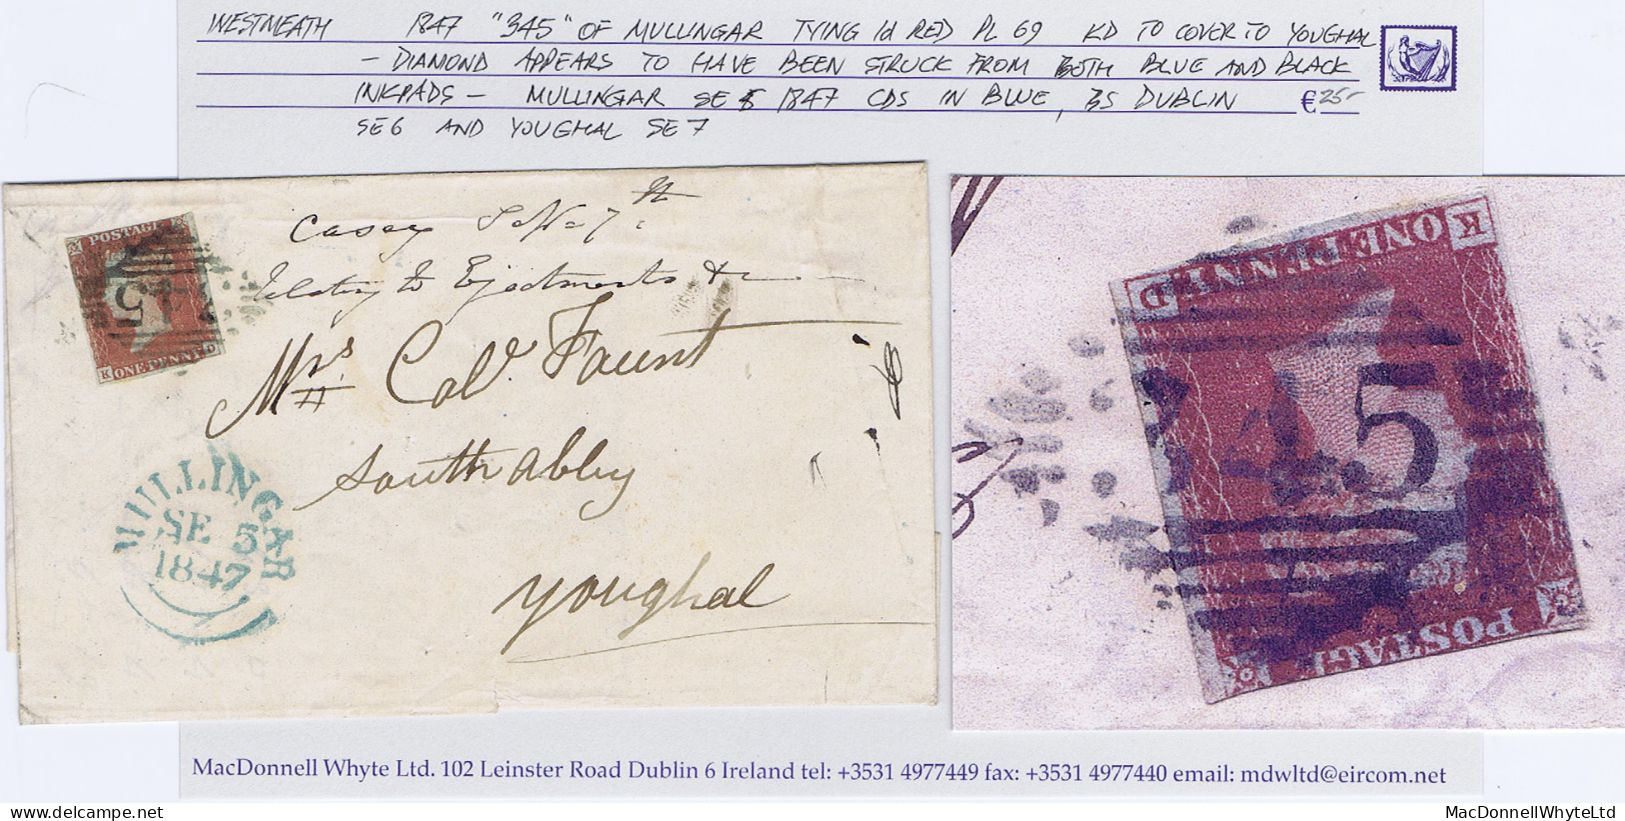 Ireland Westmeath 1847 Cover To Youghal With 1d Red Plate 69 KD Tied By "345" Of Mullingar, Green MULLINGAR SE 5 1847 Be - Prefilatelia